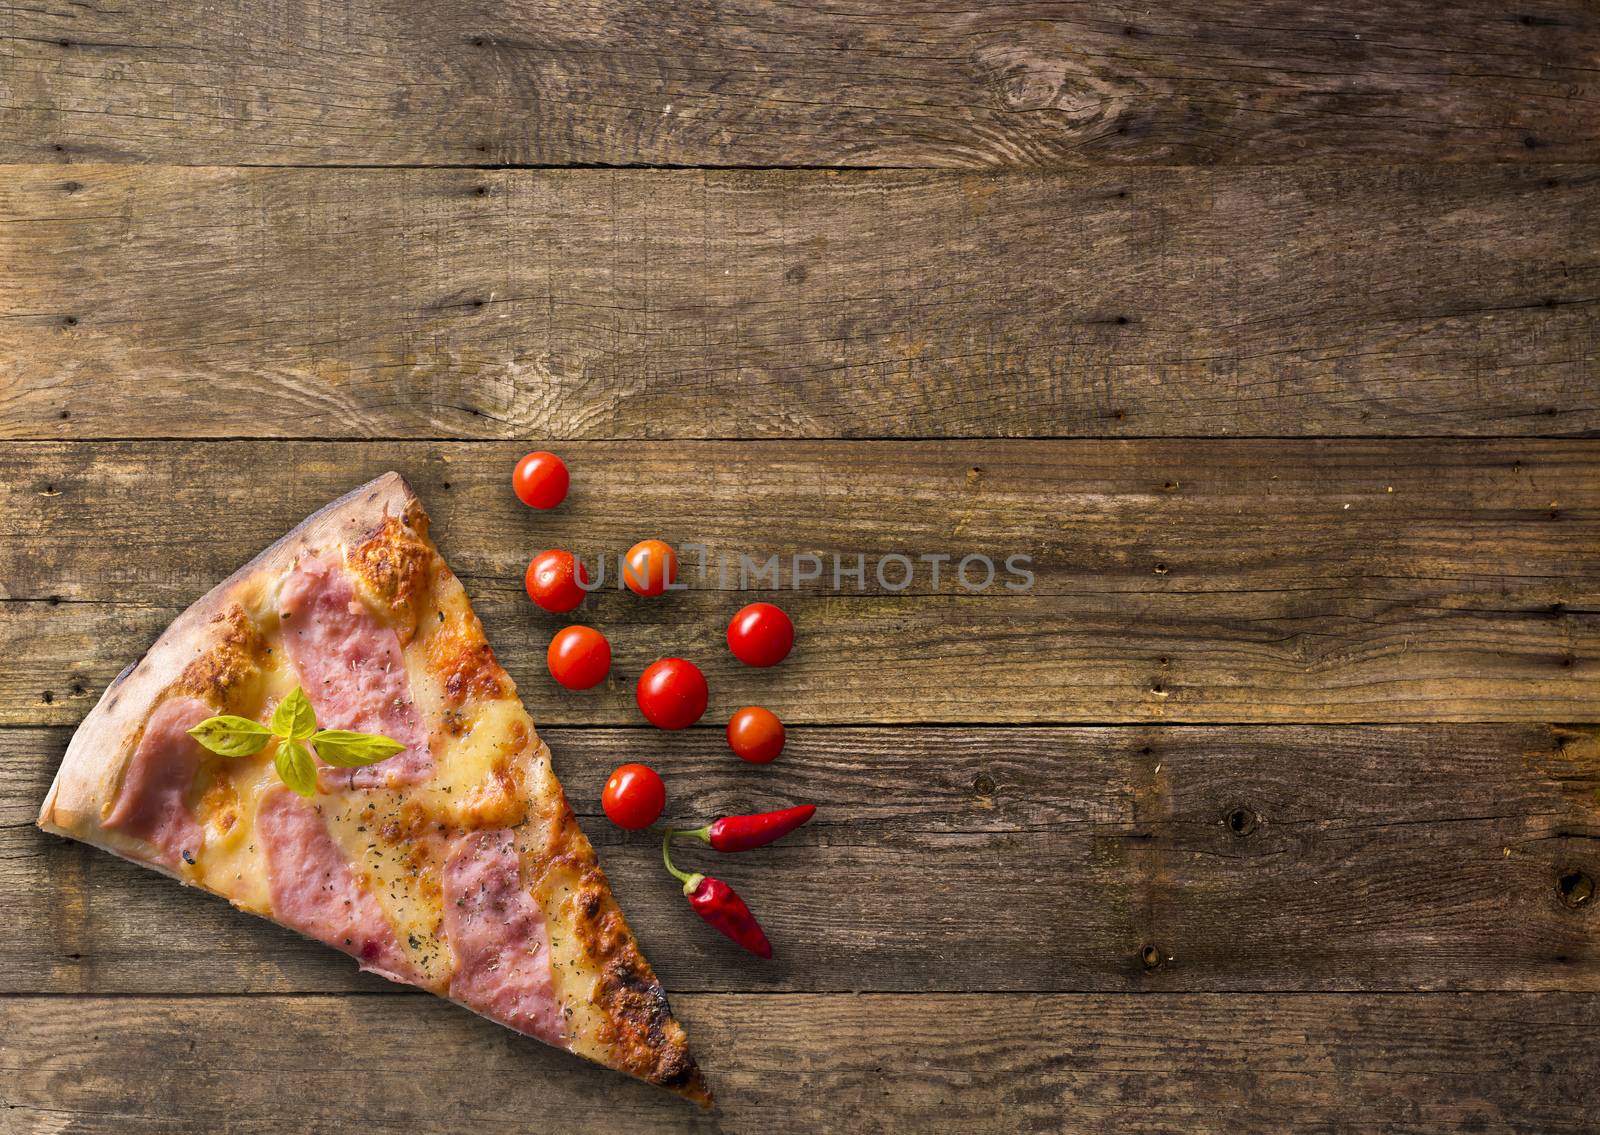 Italian food - pizza on wooden table. Cherry tomato and hot peppers around